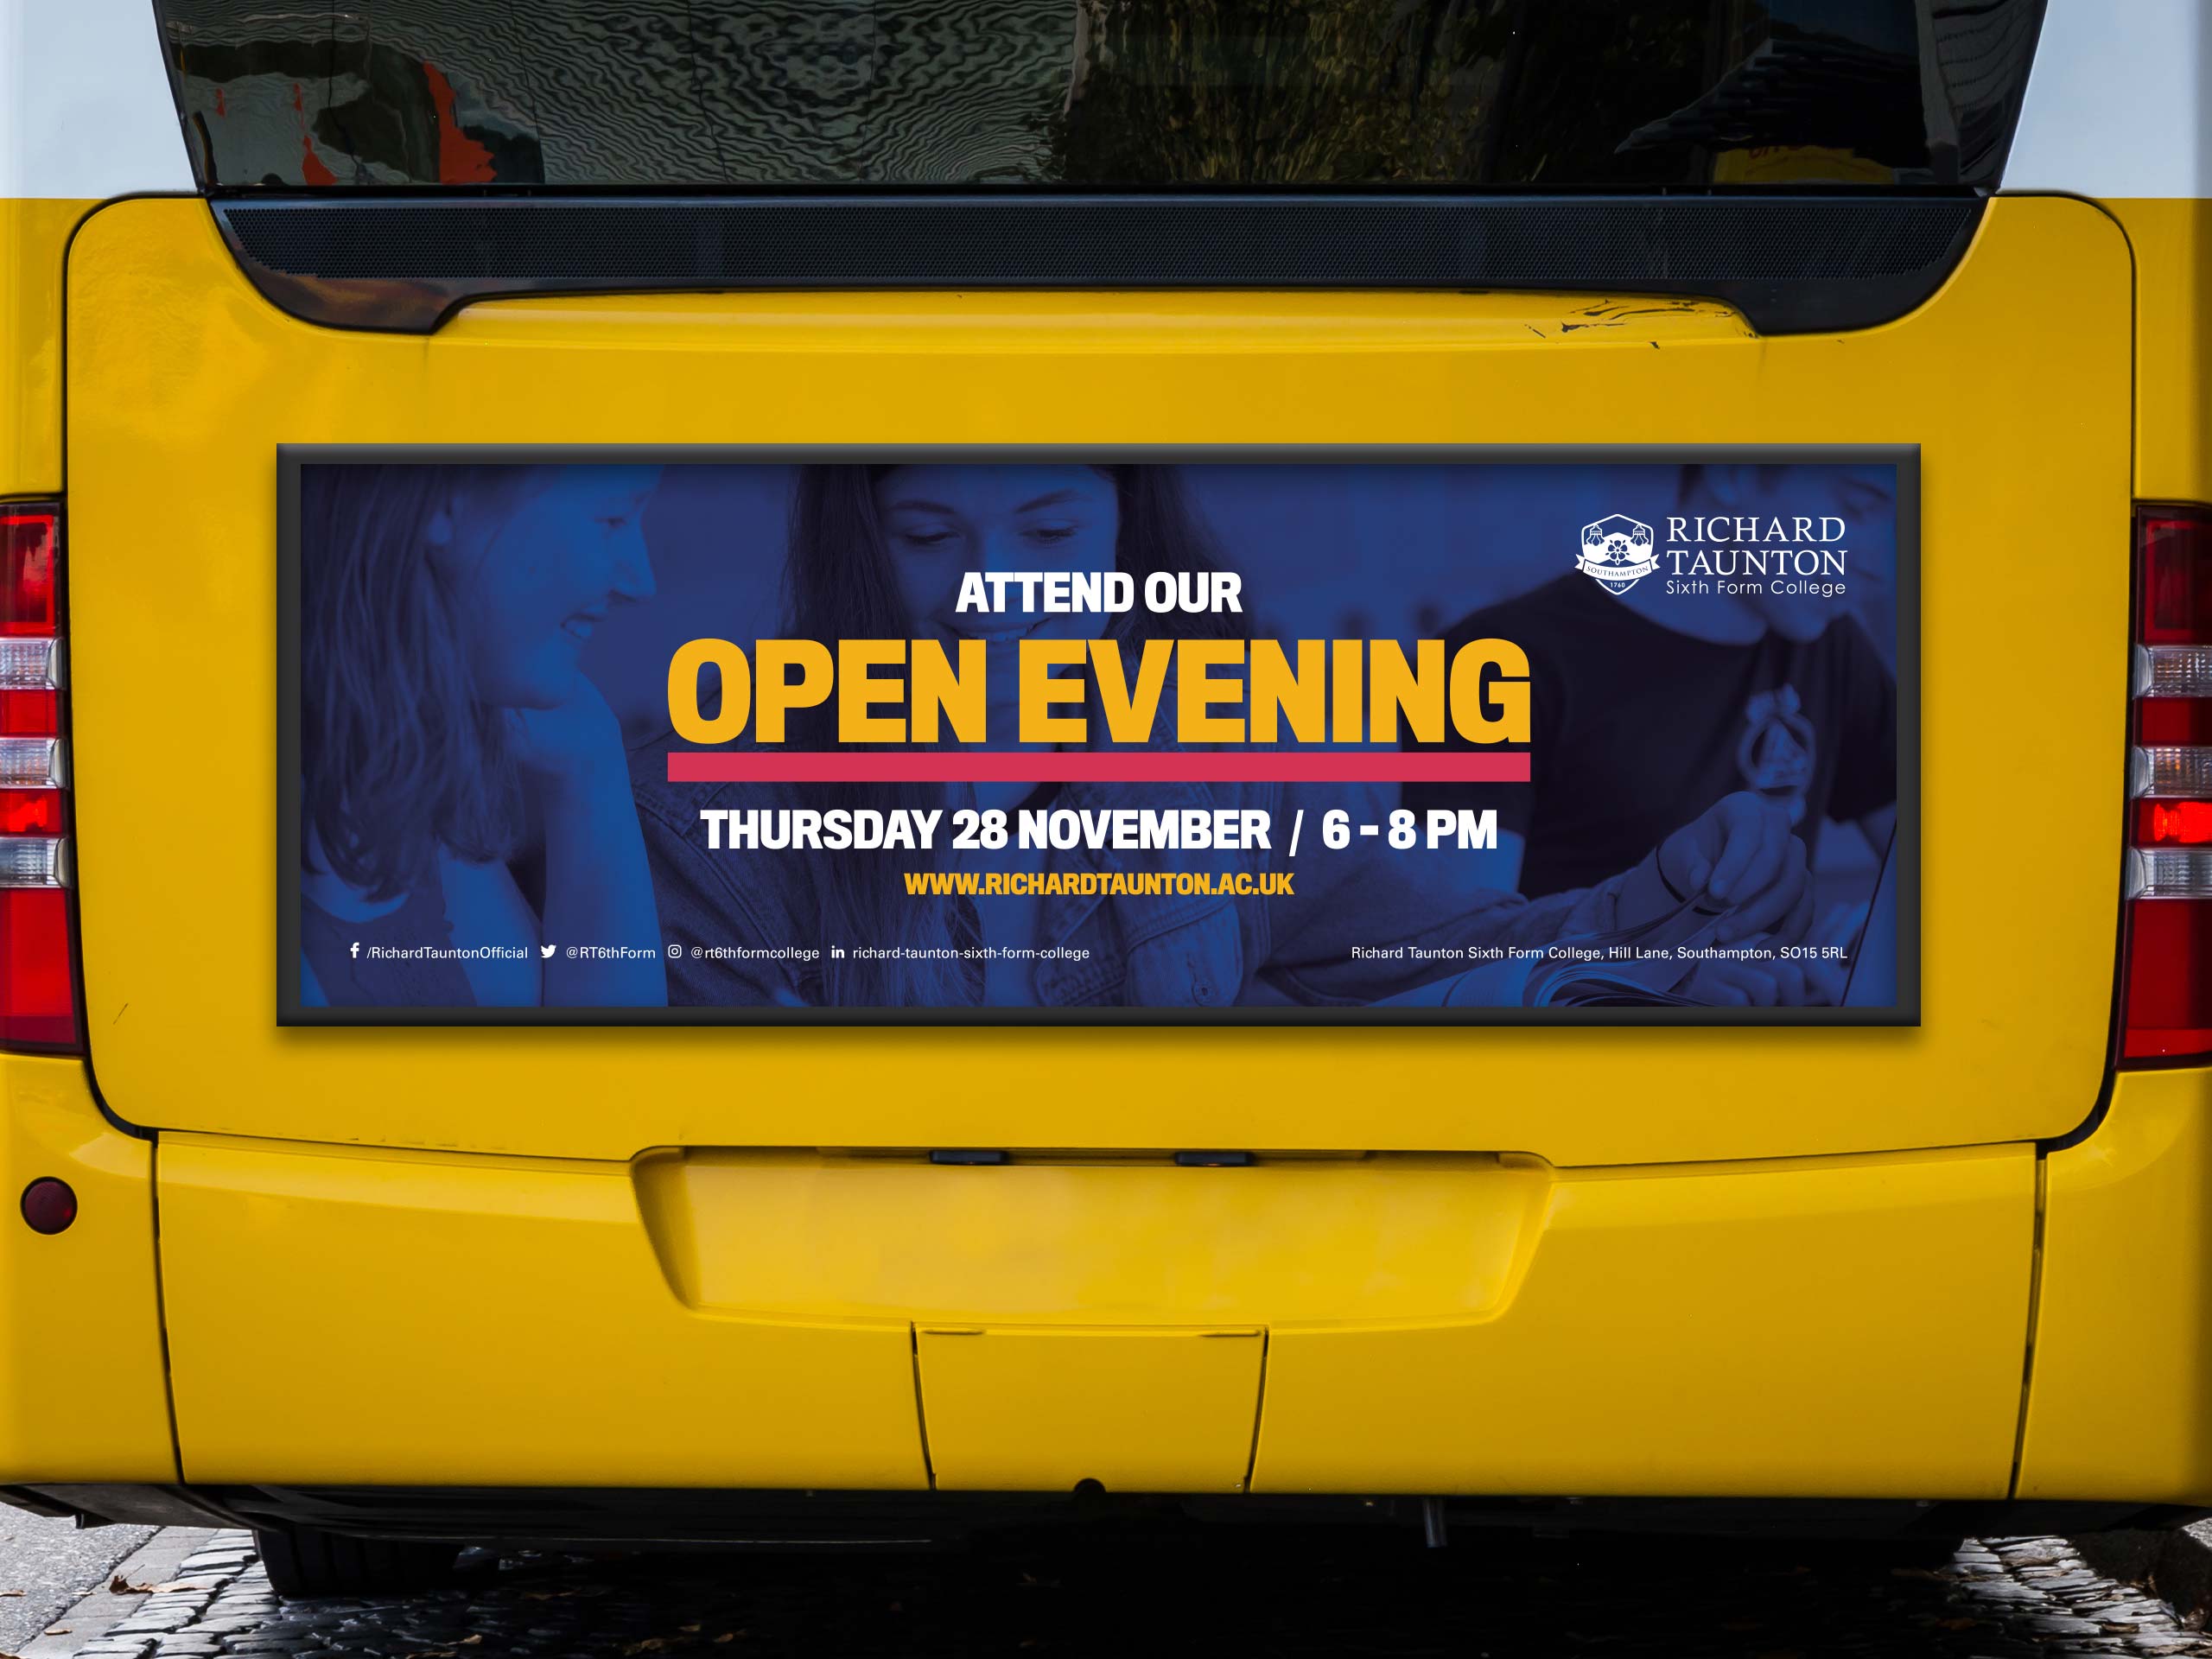 An image to show how an Open Evening event can be advertised on a bus.